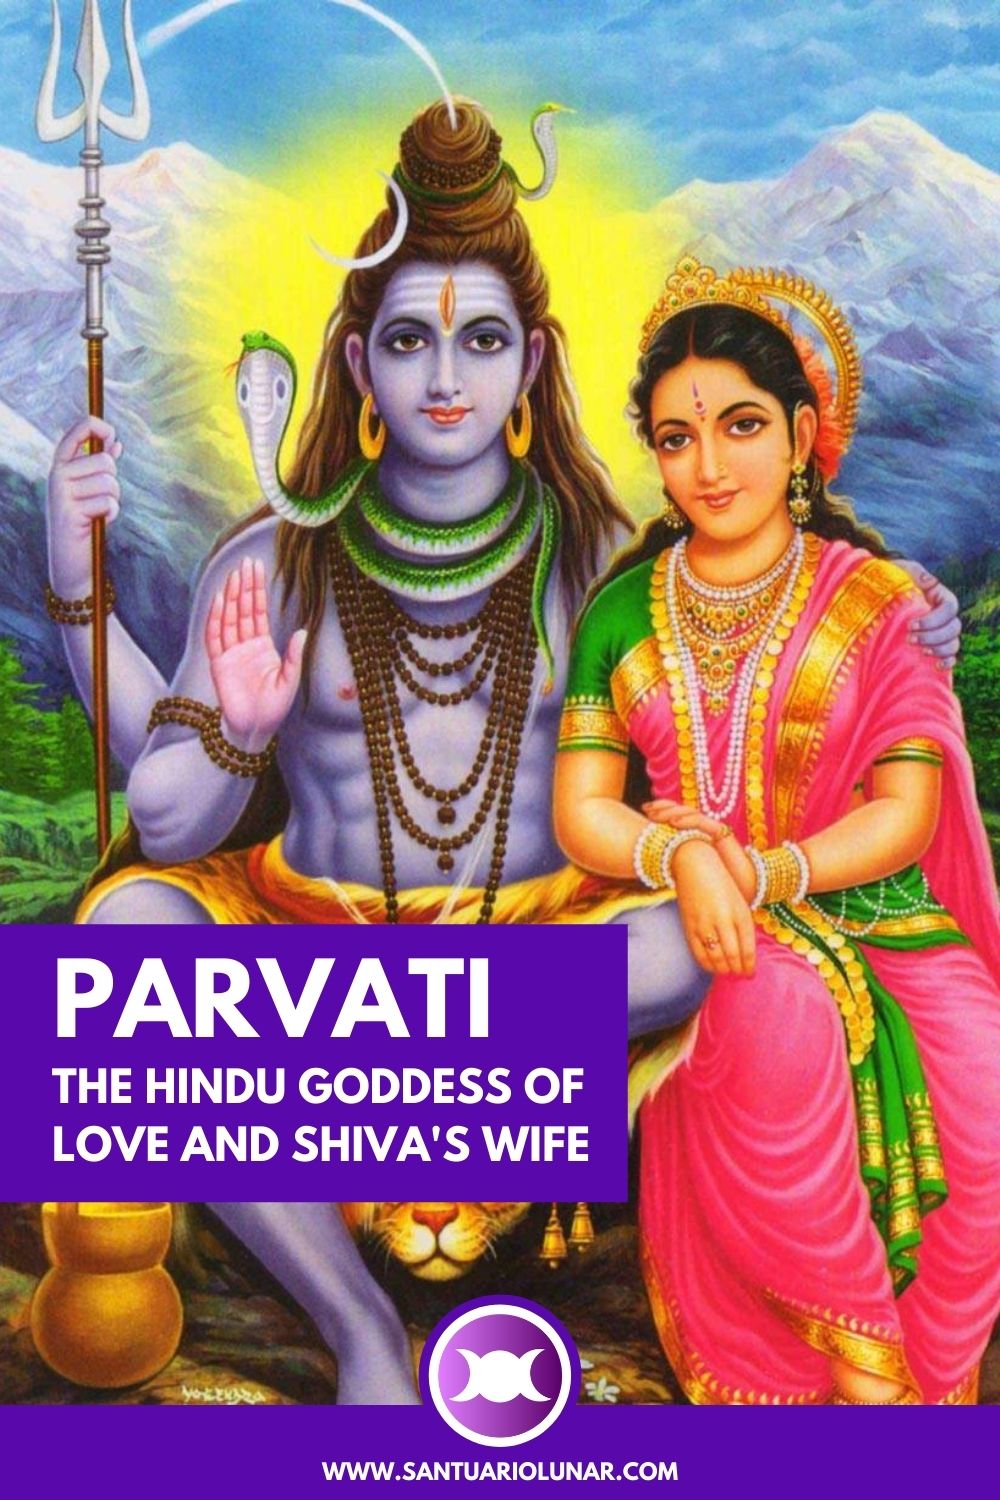 A Pin for Pinterest with a classical painting of Shiva and Parvati